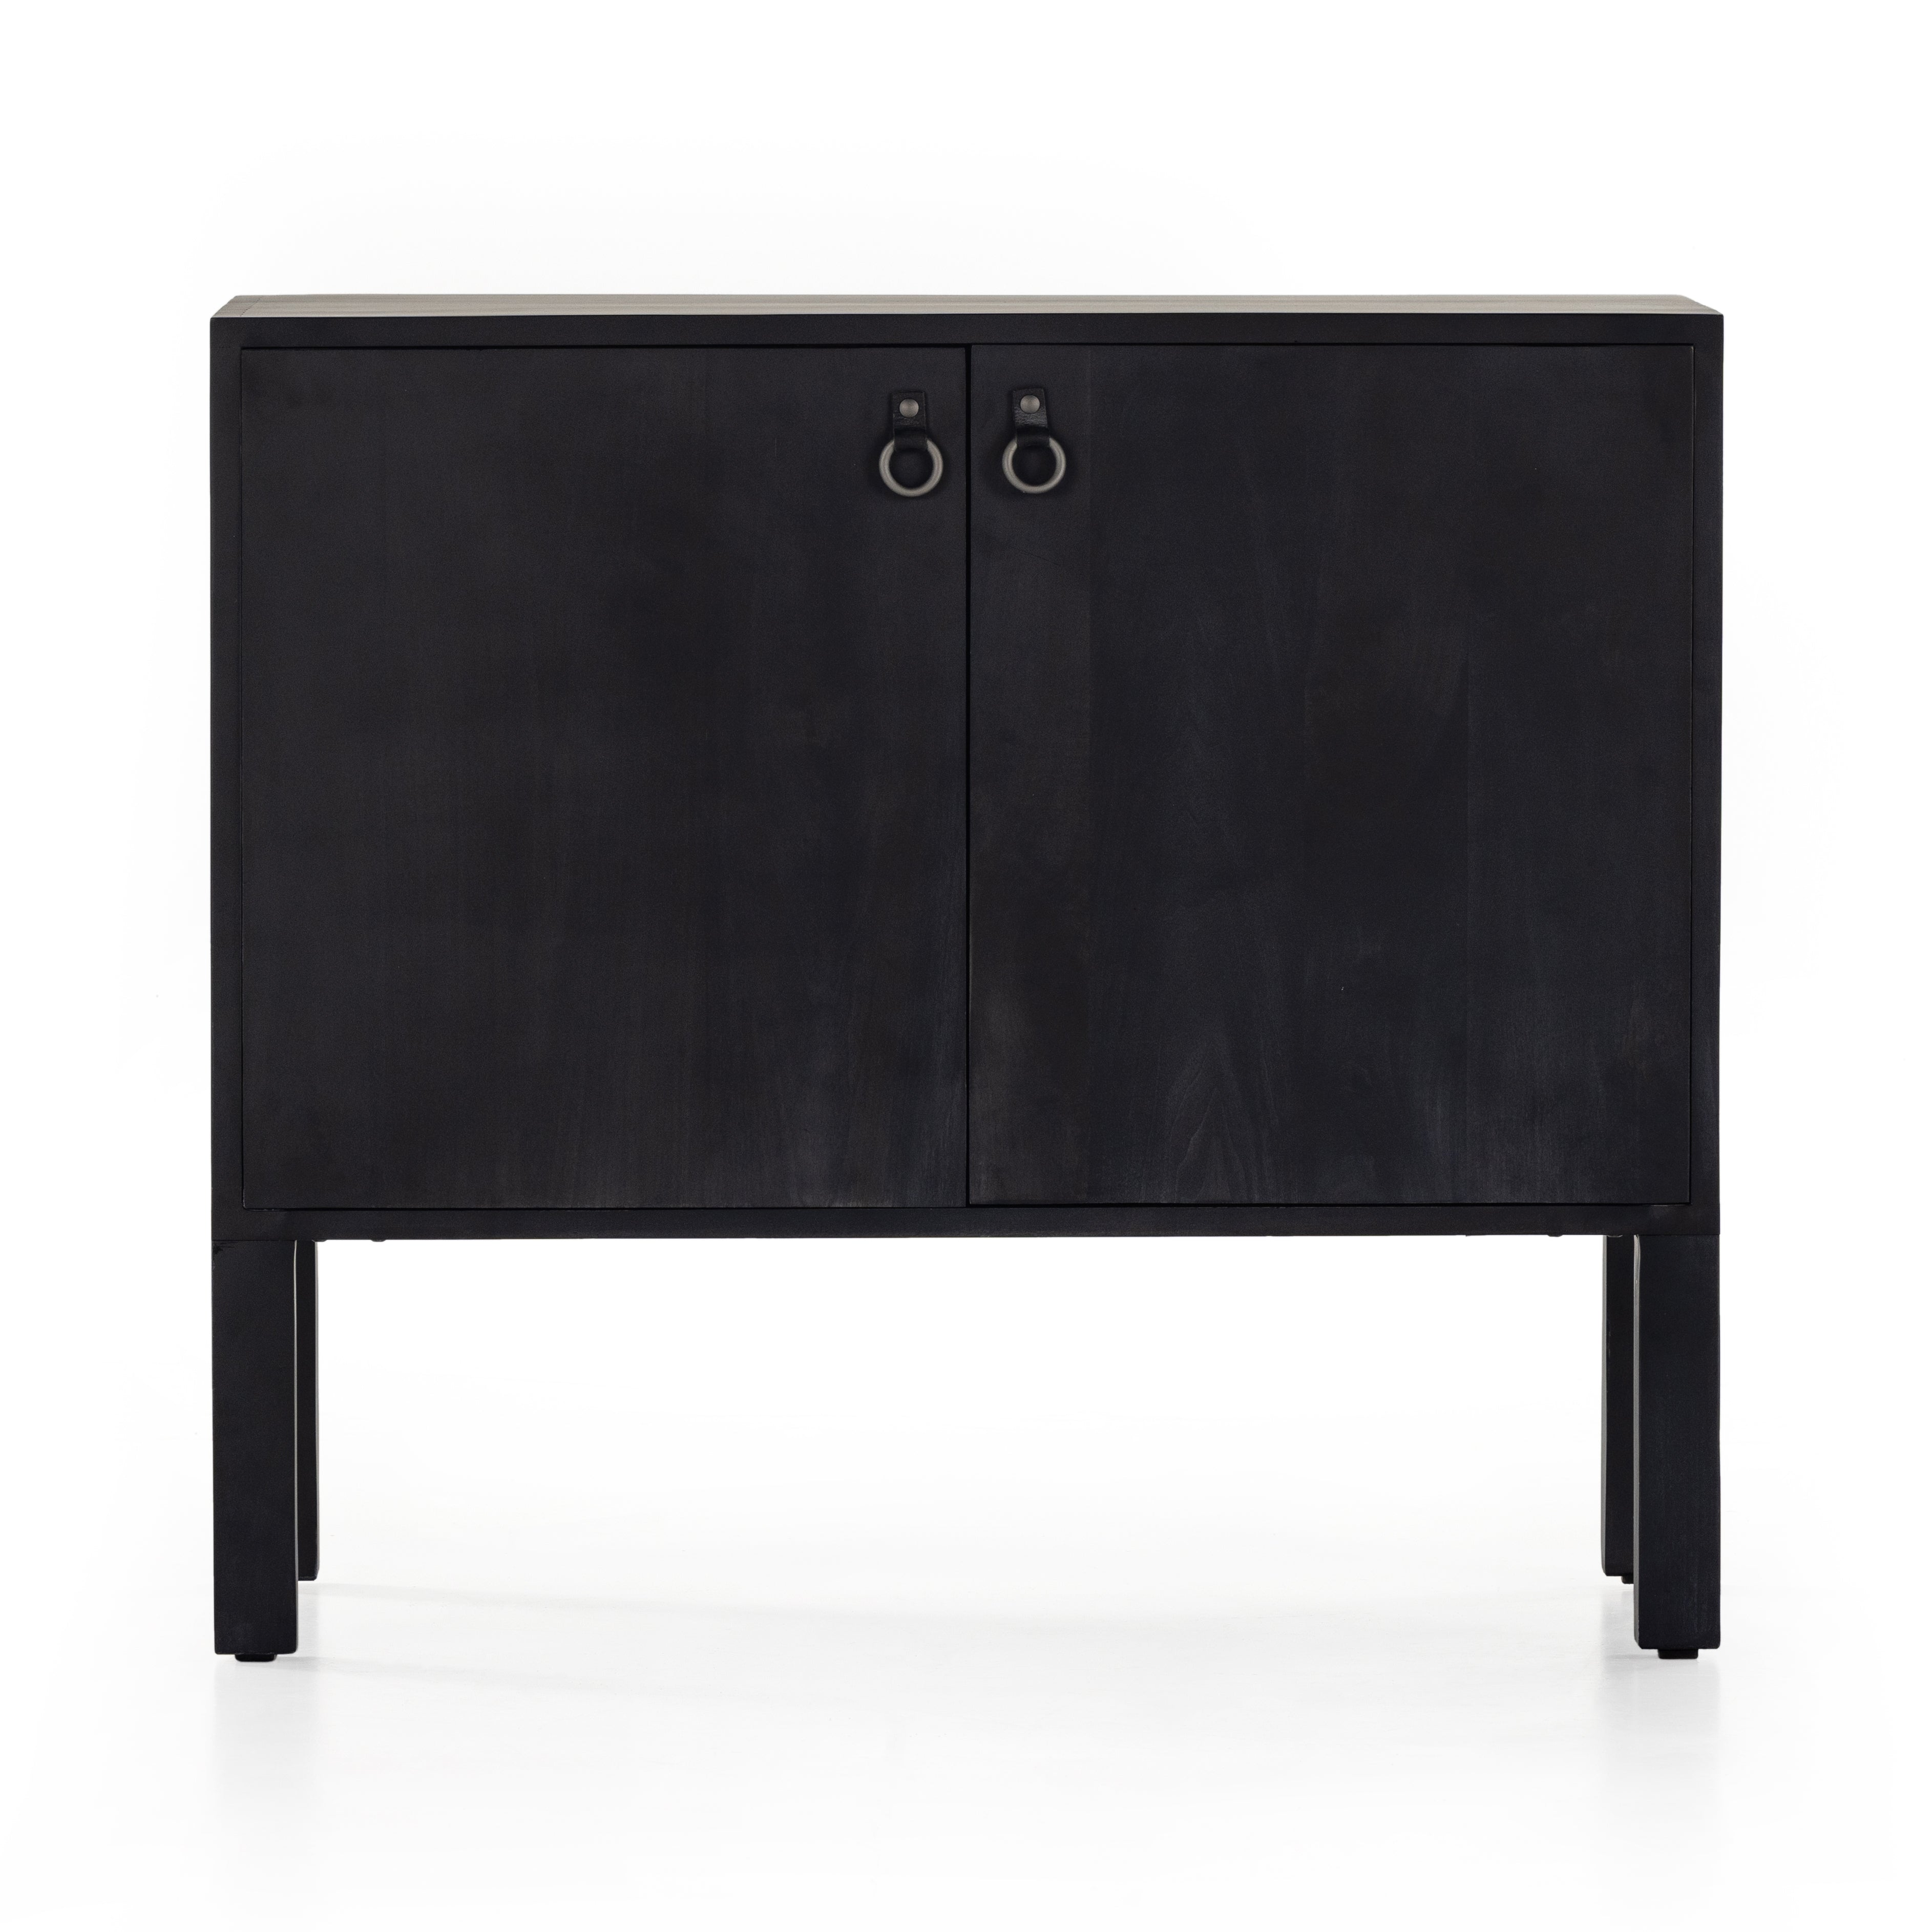 Beautifully simple in spirit. Black-washed solid poplar forms a Parsons-style bar cabinet, with iron and leather hardware for a material-driven update to Shaker-inspired styling. Inside, dual drawers plus generous bottle storage await drink go-tos and bar accessories. Amethyst Home provides interior design, new construction, custom furniture, and area rugs in the Washington metro area.